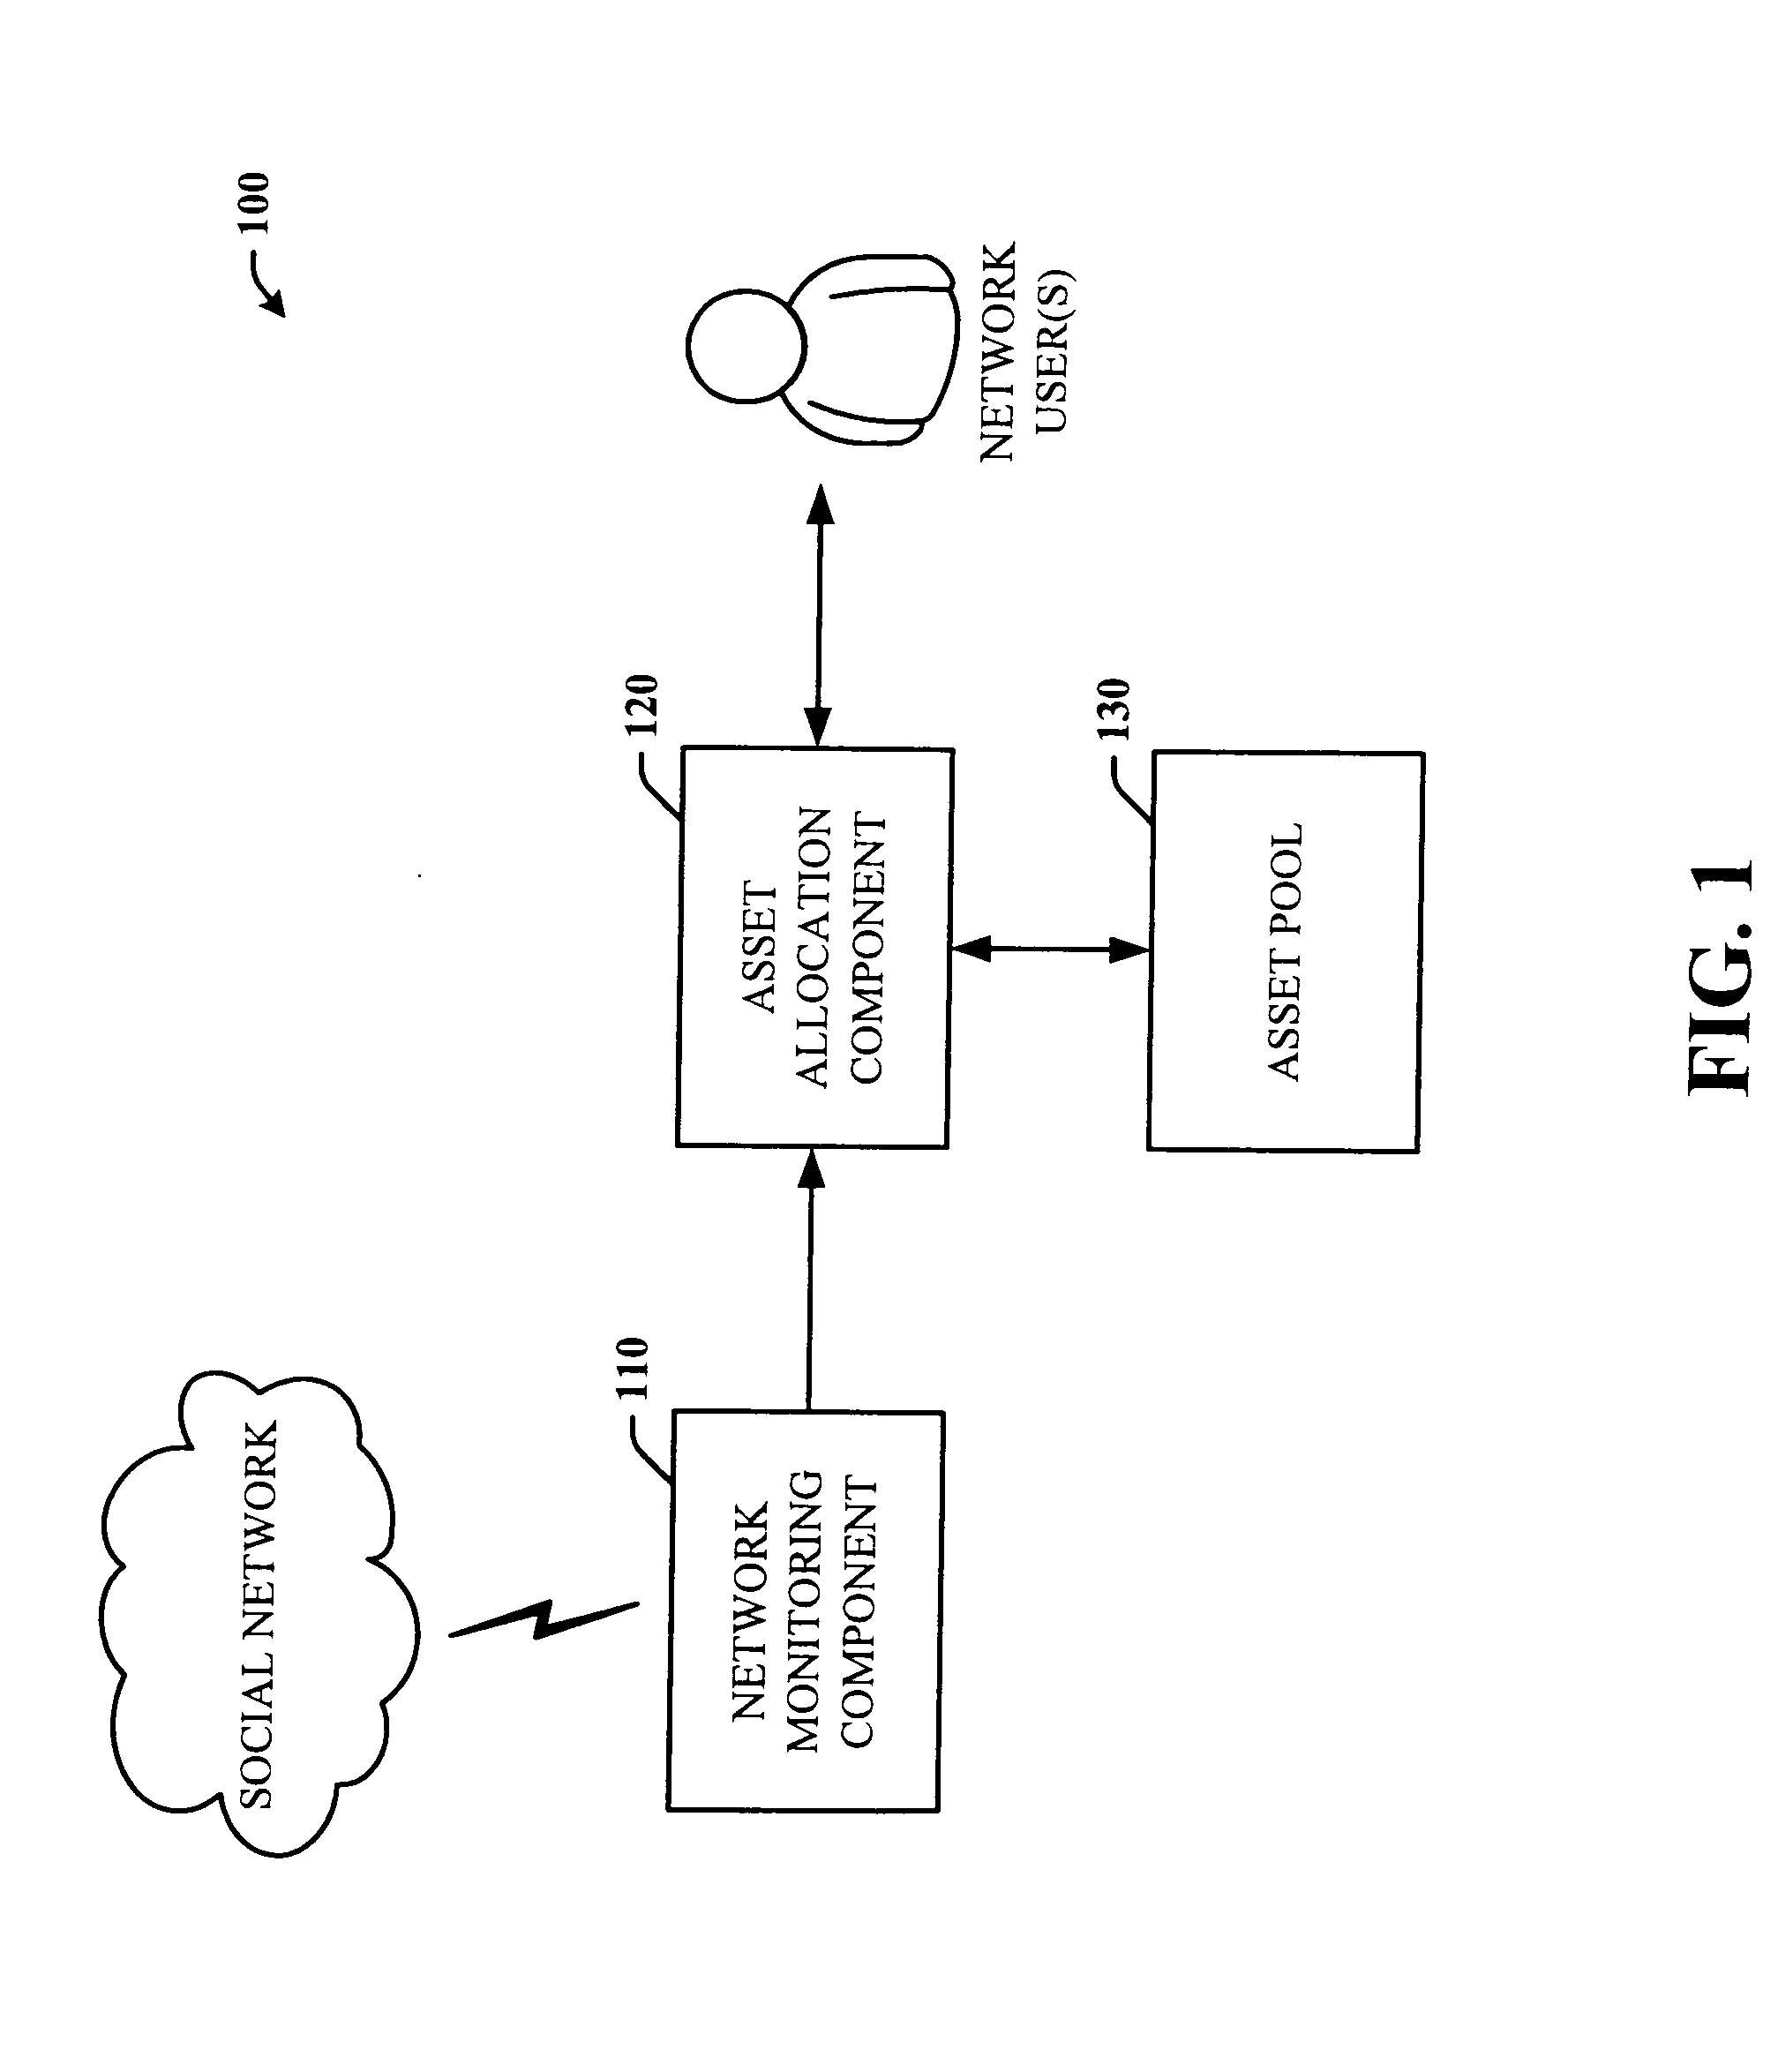 Systems and methods to facilitate self regulation of social networks through trading and gift exchange